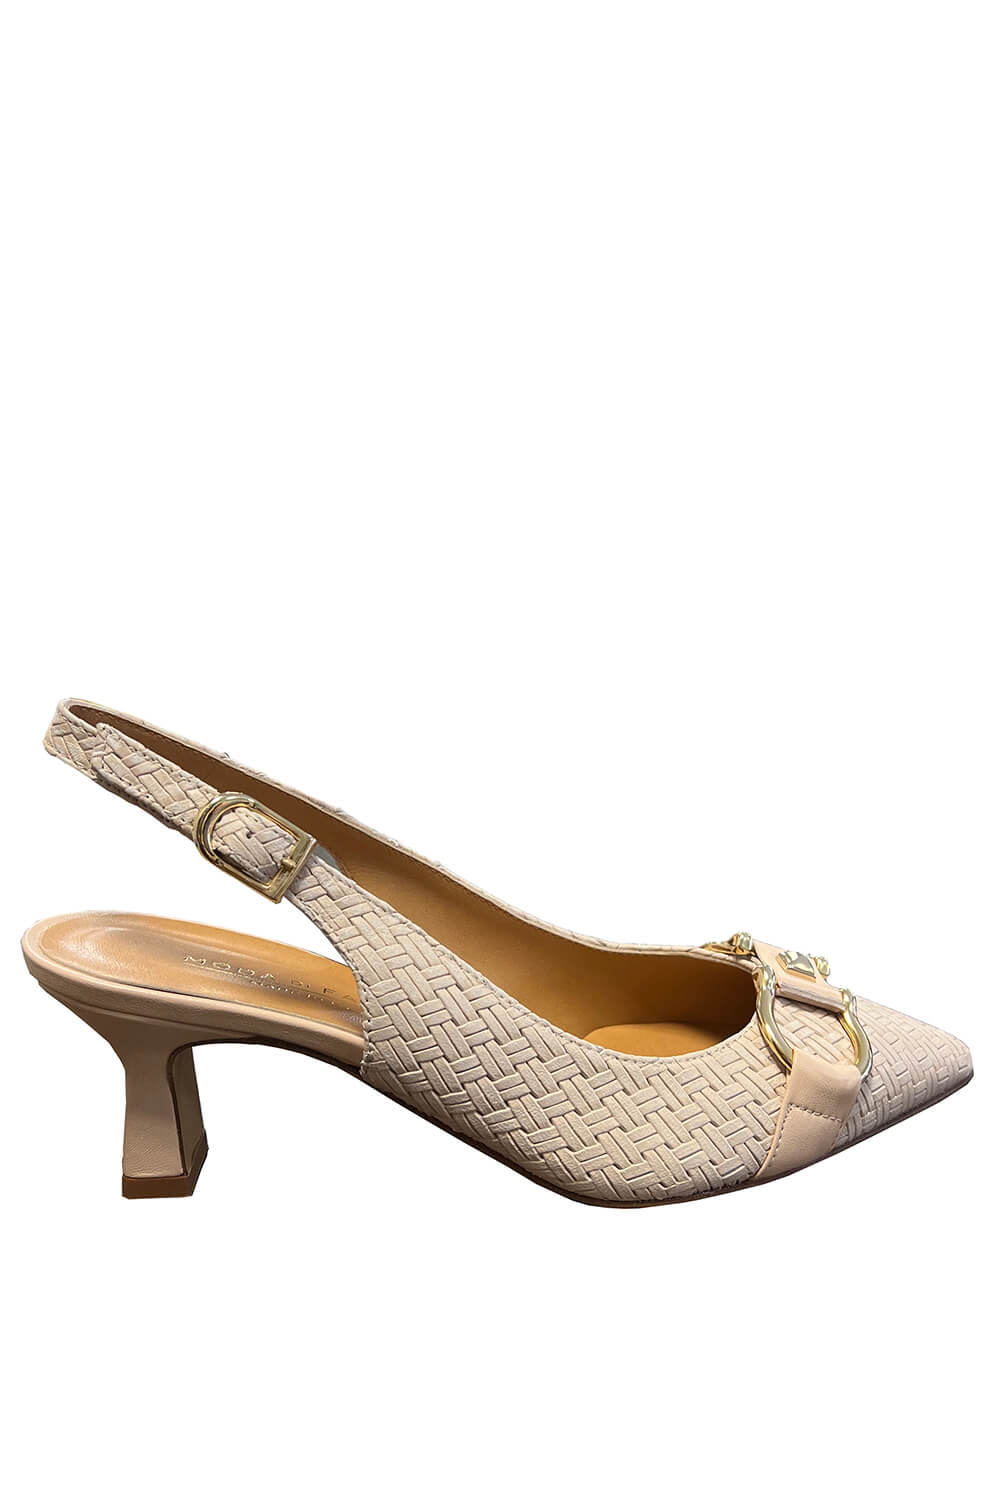 nude colored MODA DI FAUSTO slingback pumps in braided leather with golden charms